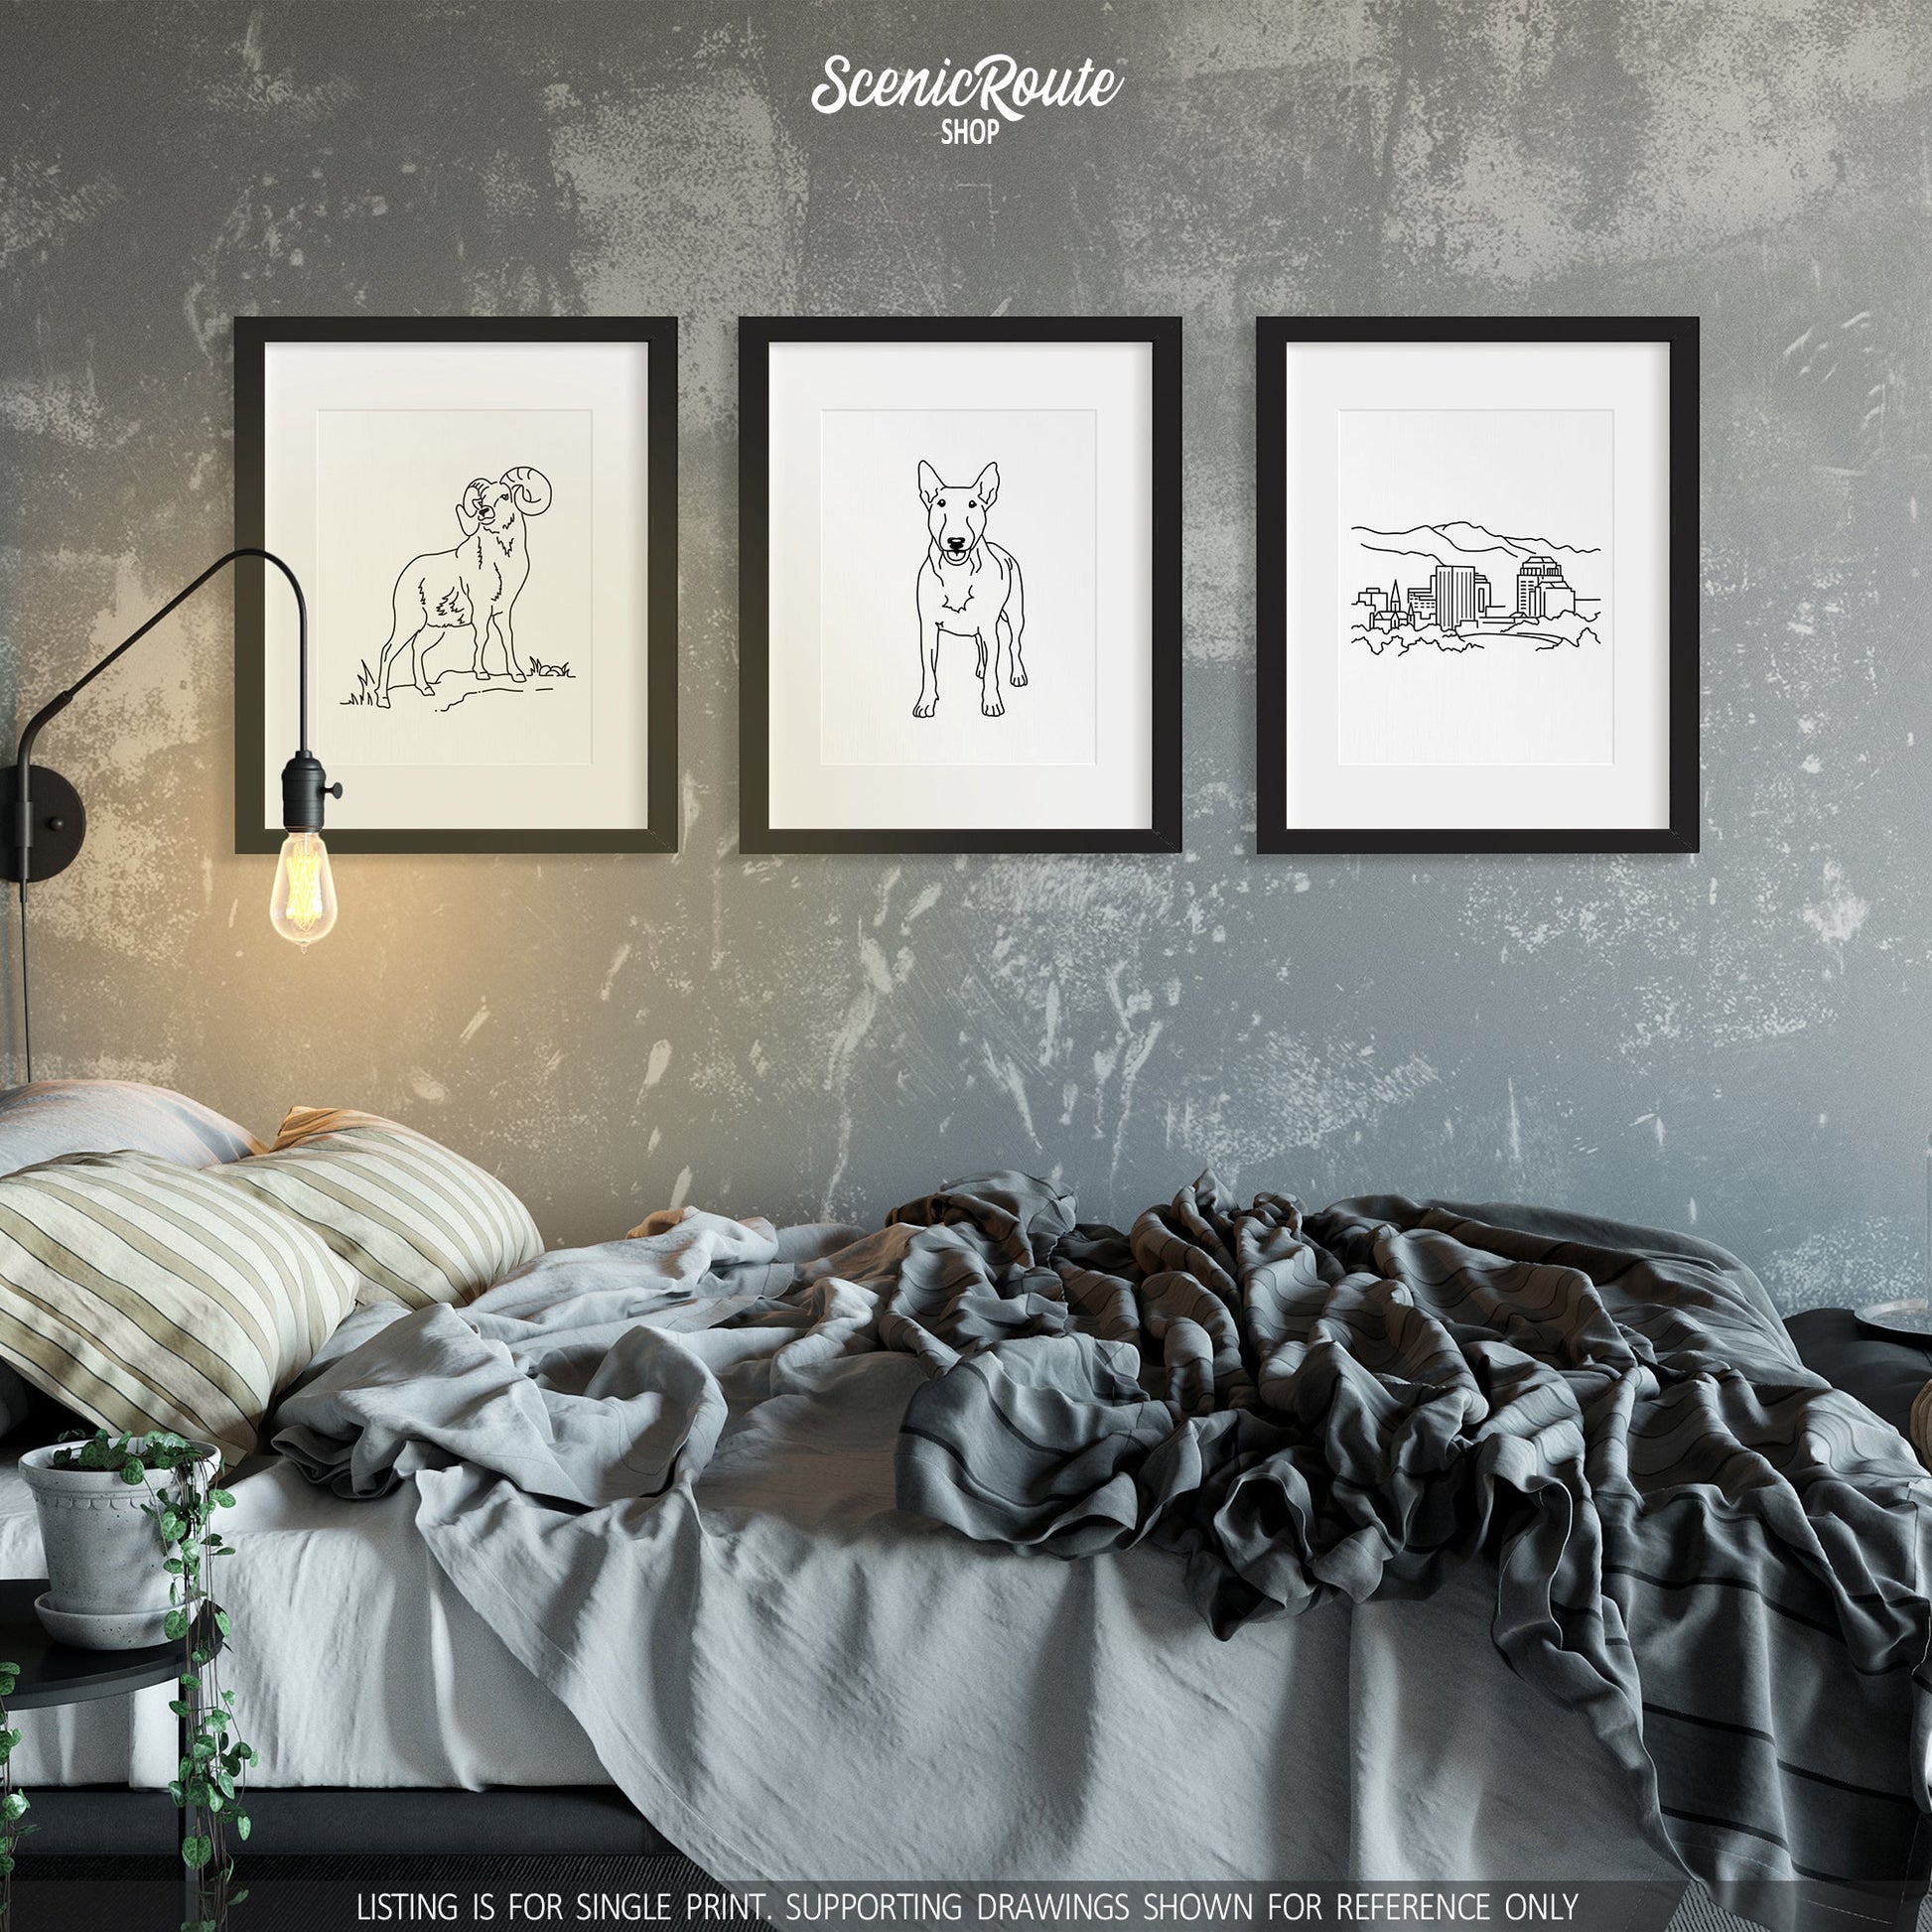 A group of three framed drawings on a concrete wall above a messy bed. The line art drawings include a Longhorn Sheep, a Bull Terrier dog, and the Colorado Springs Skyline